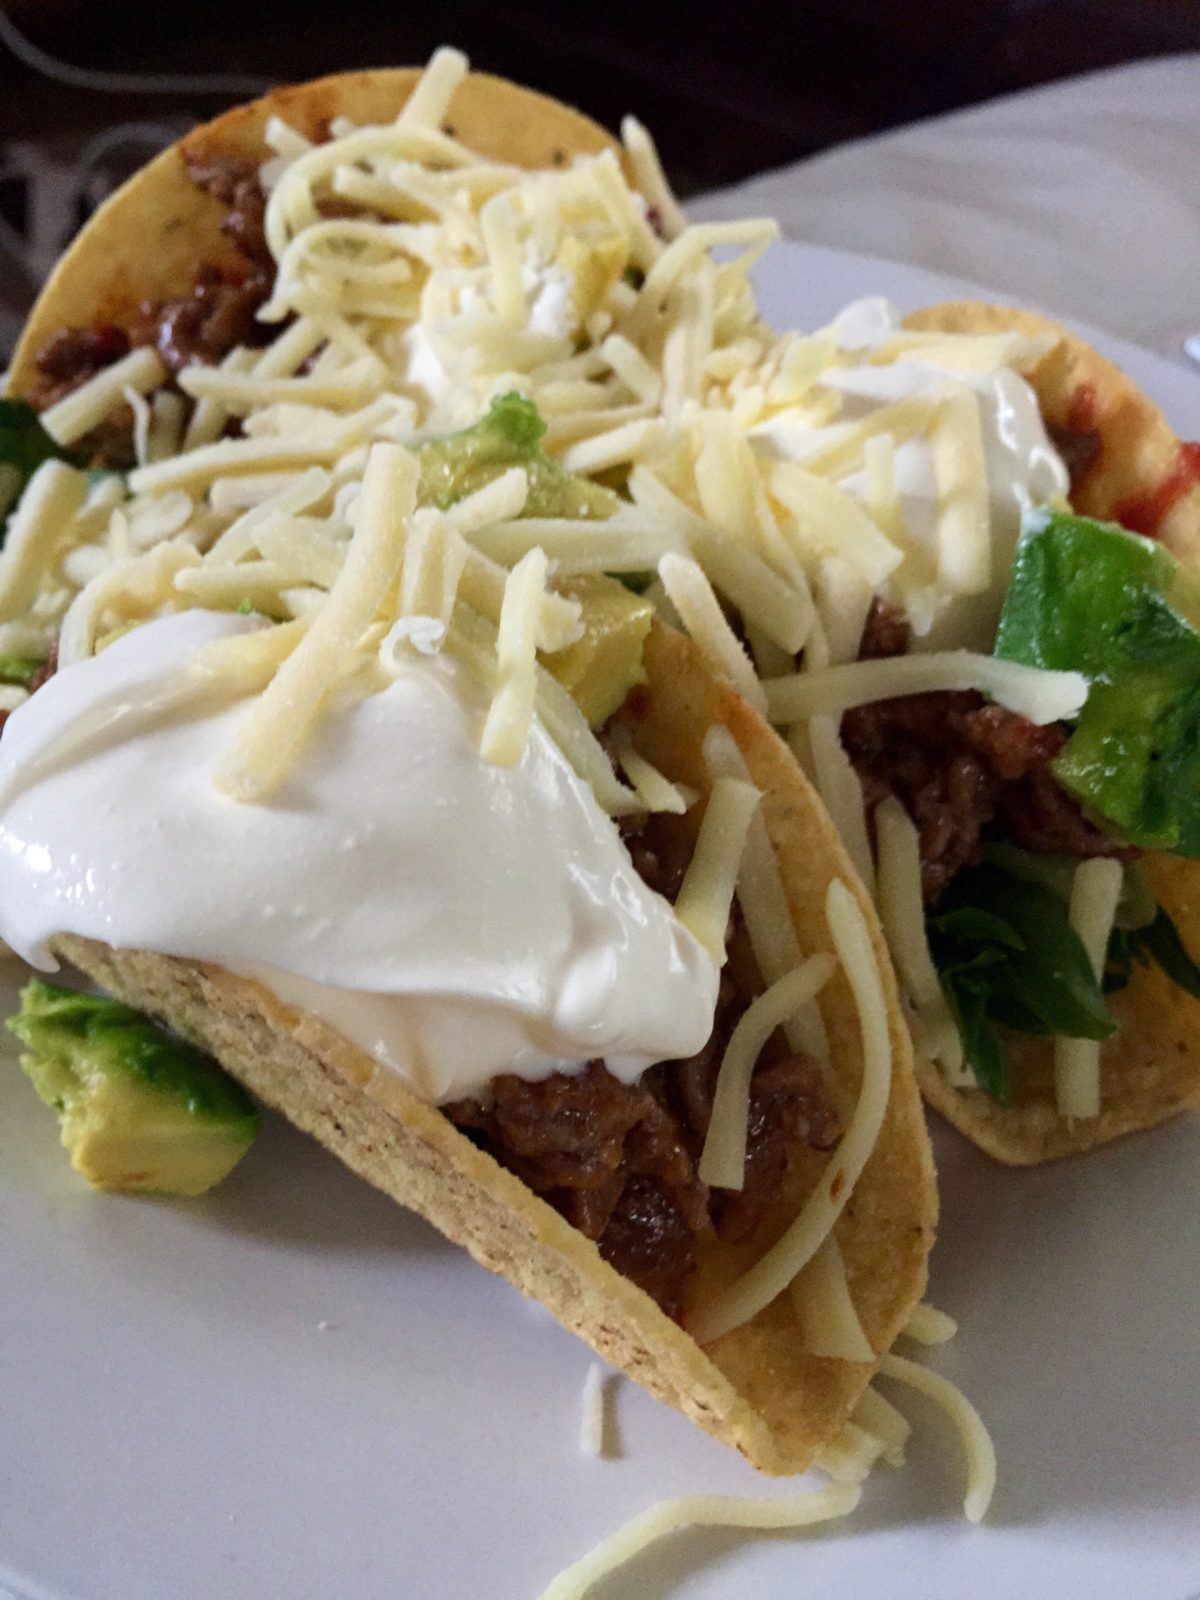 MEXICAN FOOD LUNCH » Heads Up Launceston